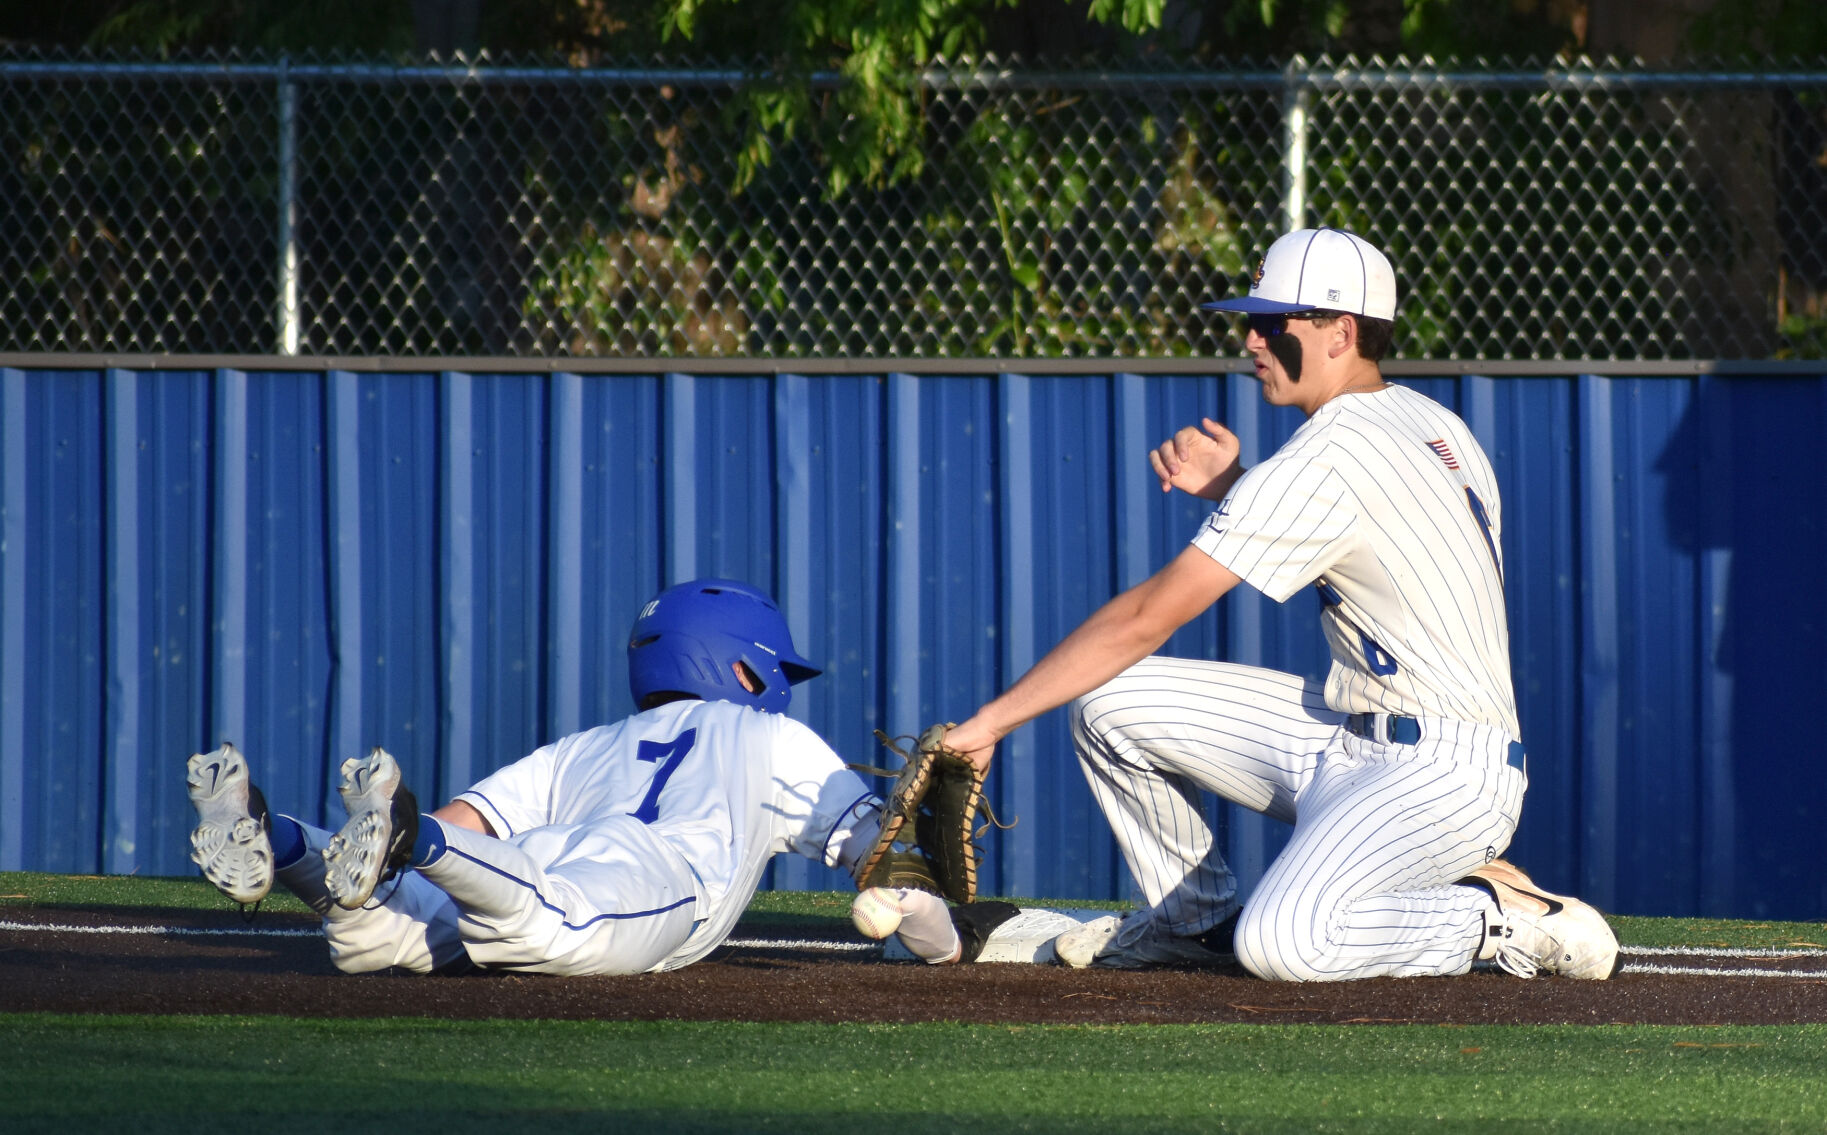 St. Tammany Baseball Teams Navigate Bye Week Challenges and Opportunities